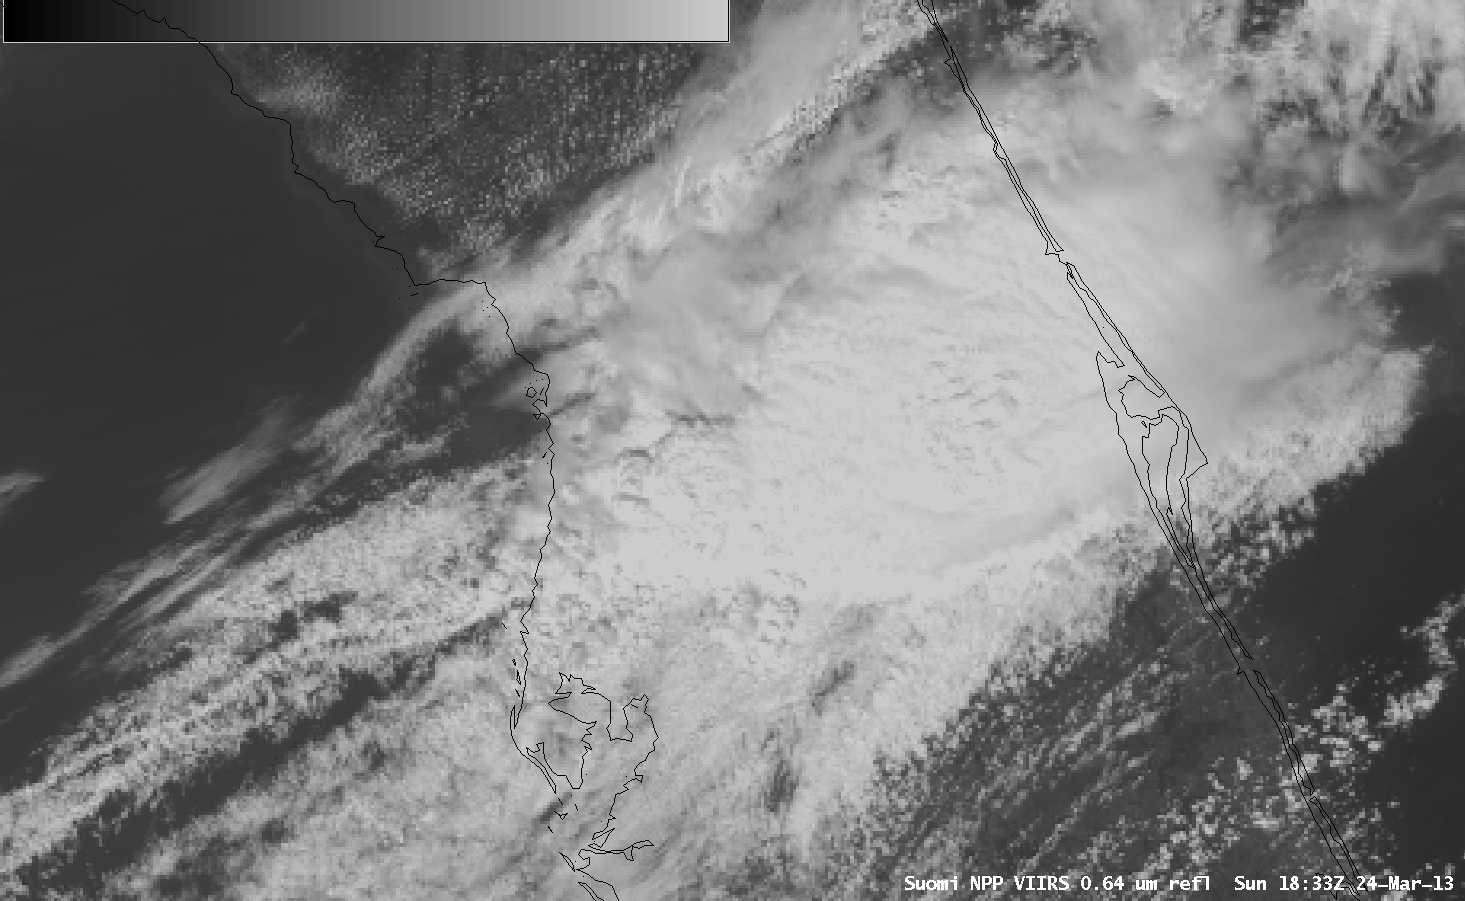 Suomi NPP VIIRS 0.64 Âµm visible channel and 11.45 Âµm IR channel images (with overlays of surface reports and severe weather reports)